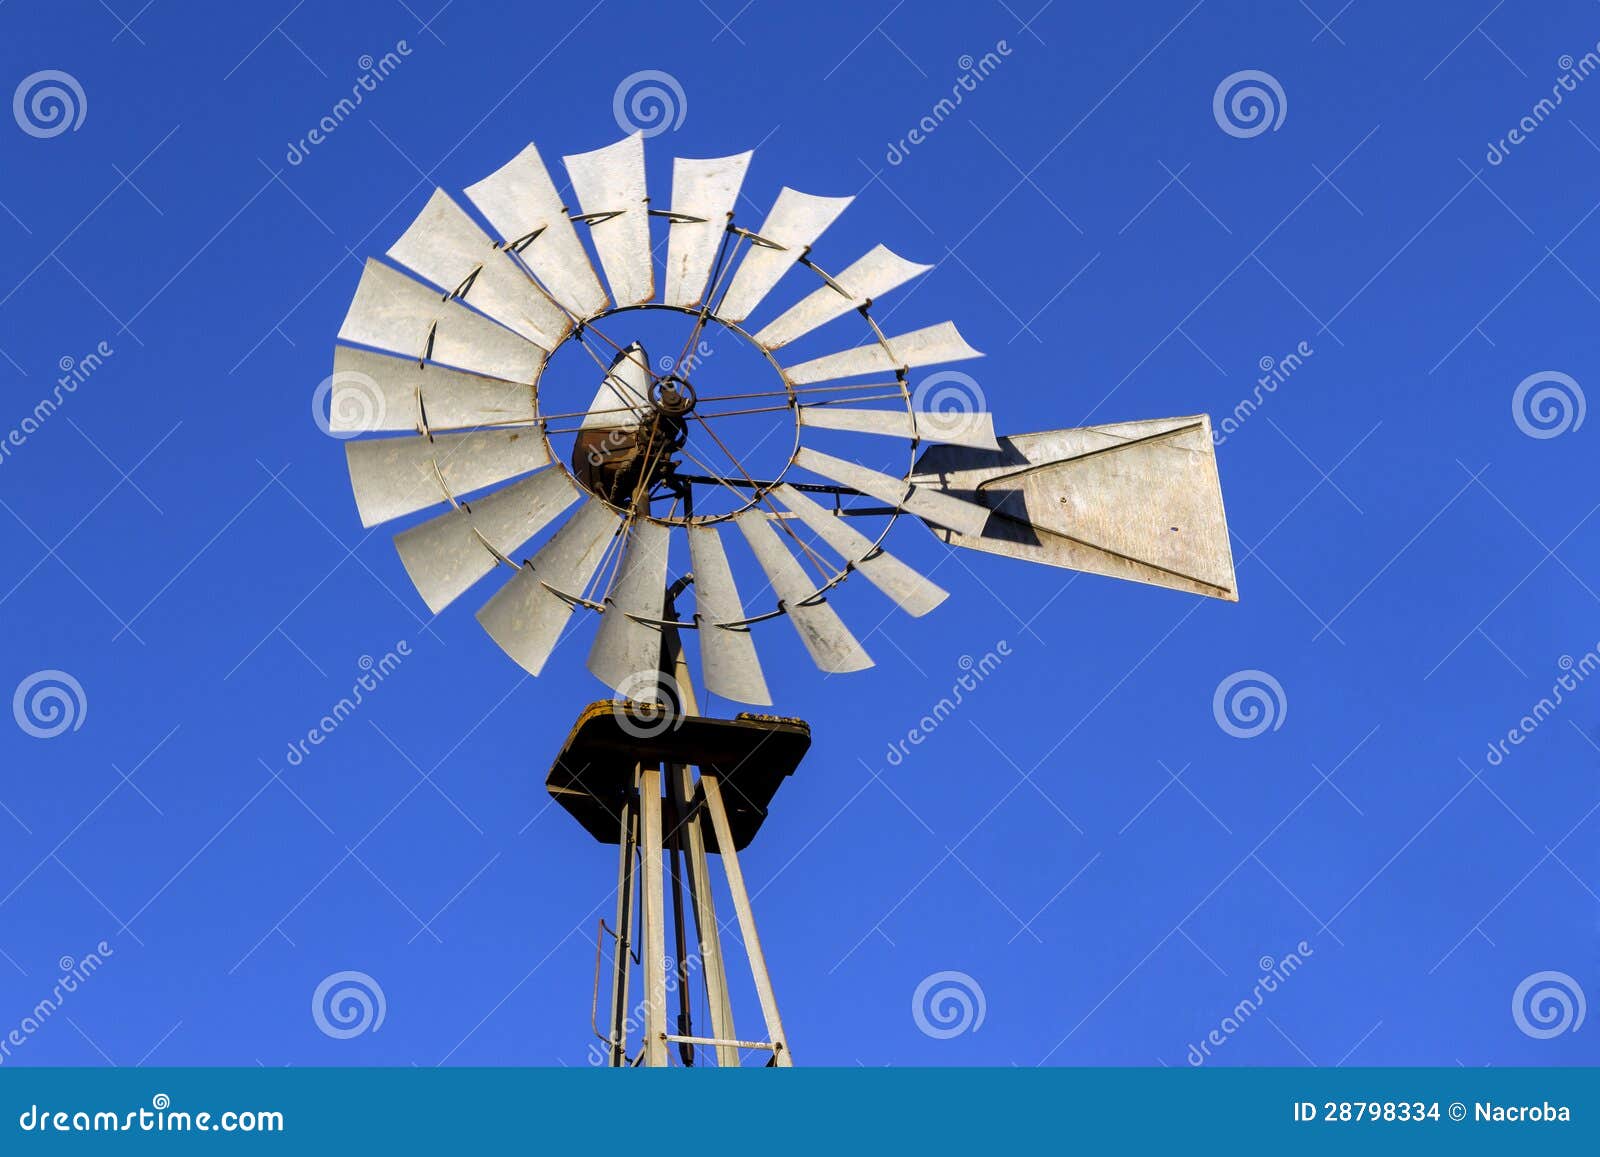 Old antique Aermotor windmill in movement used to pump water for 